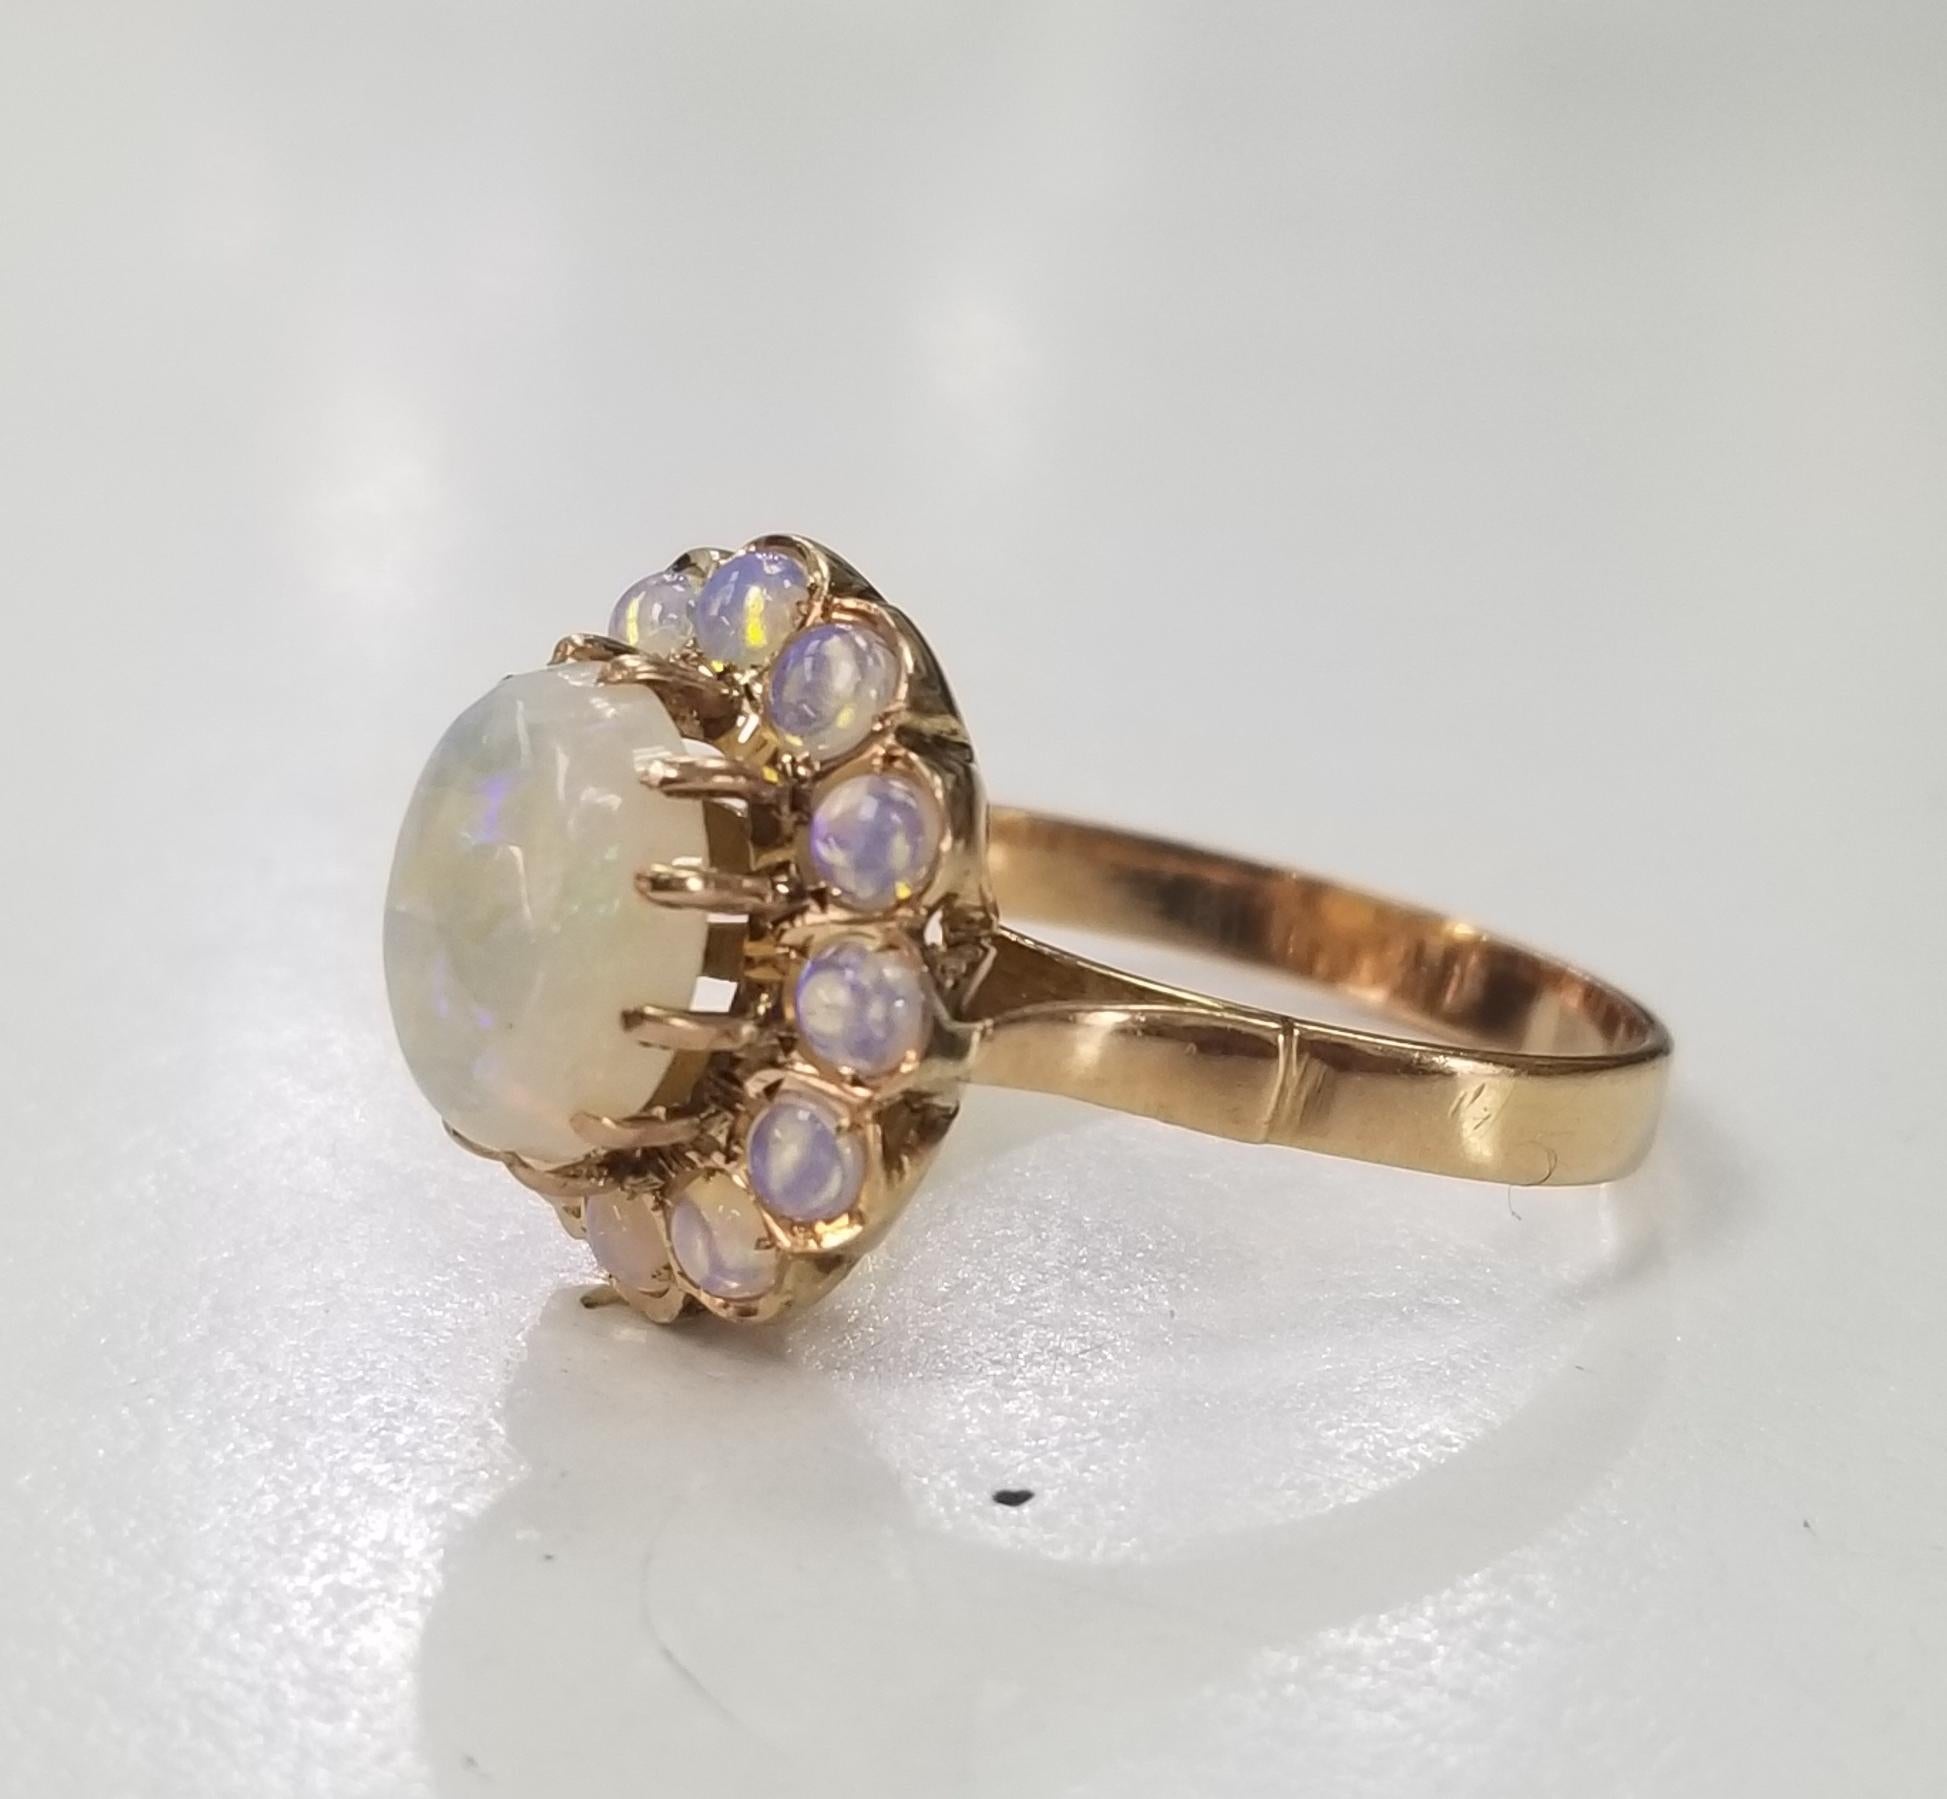 14k yellow gold opal ring, containing 1 oval opal weighing 2.00cts. and surrounded by round opals weighing 1.20cts.  This ring is a size 7.75 but we will size to fit for free.